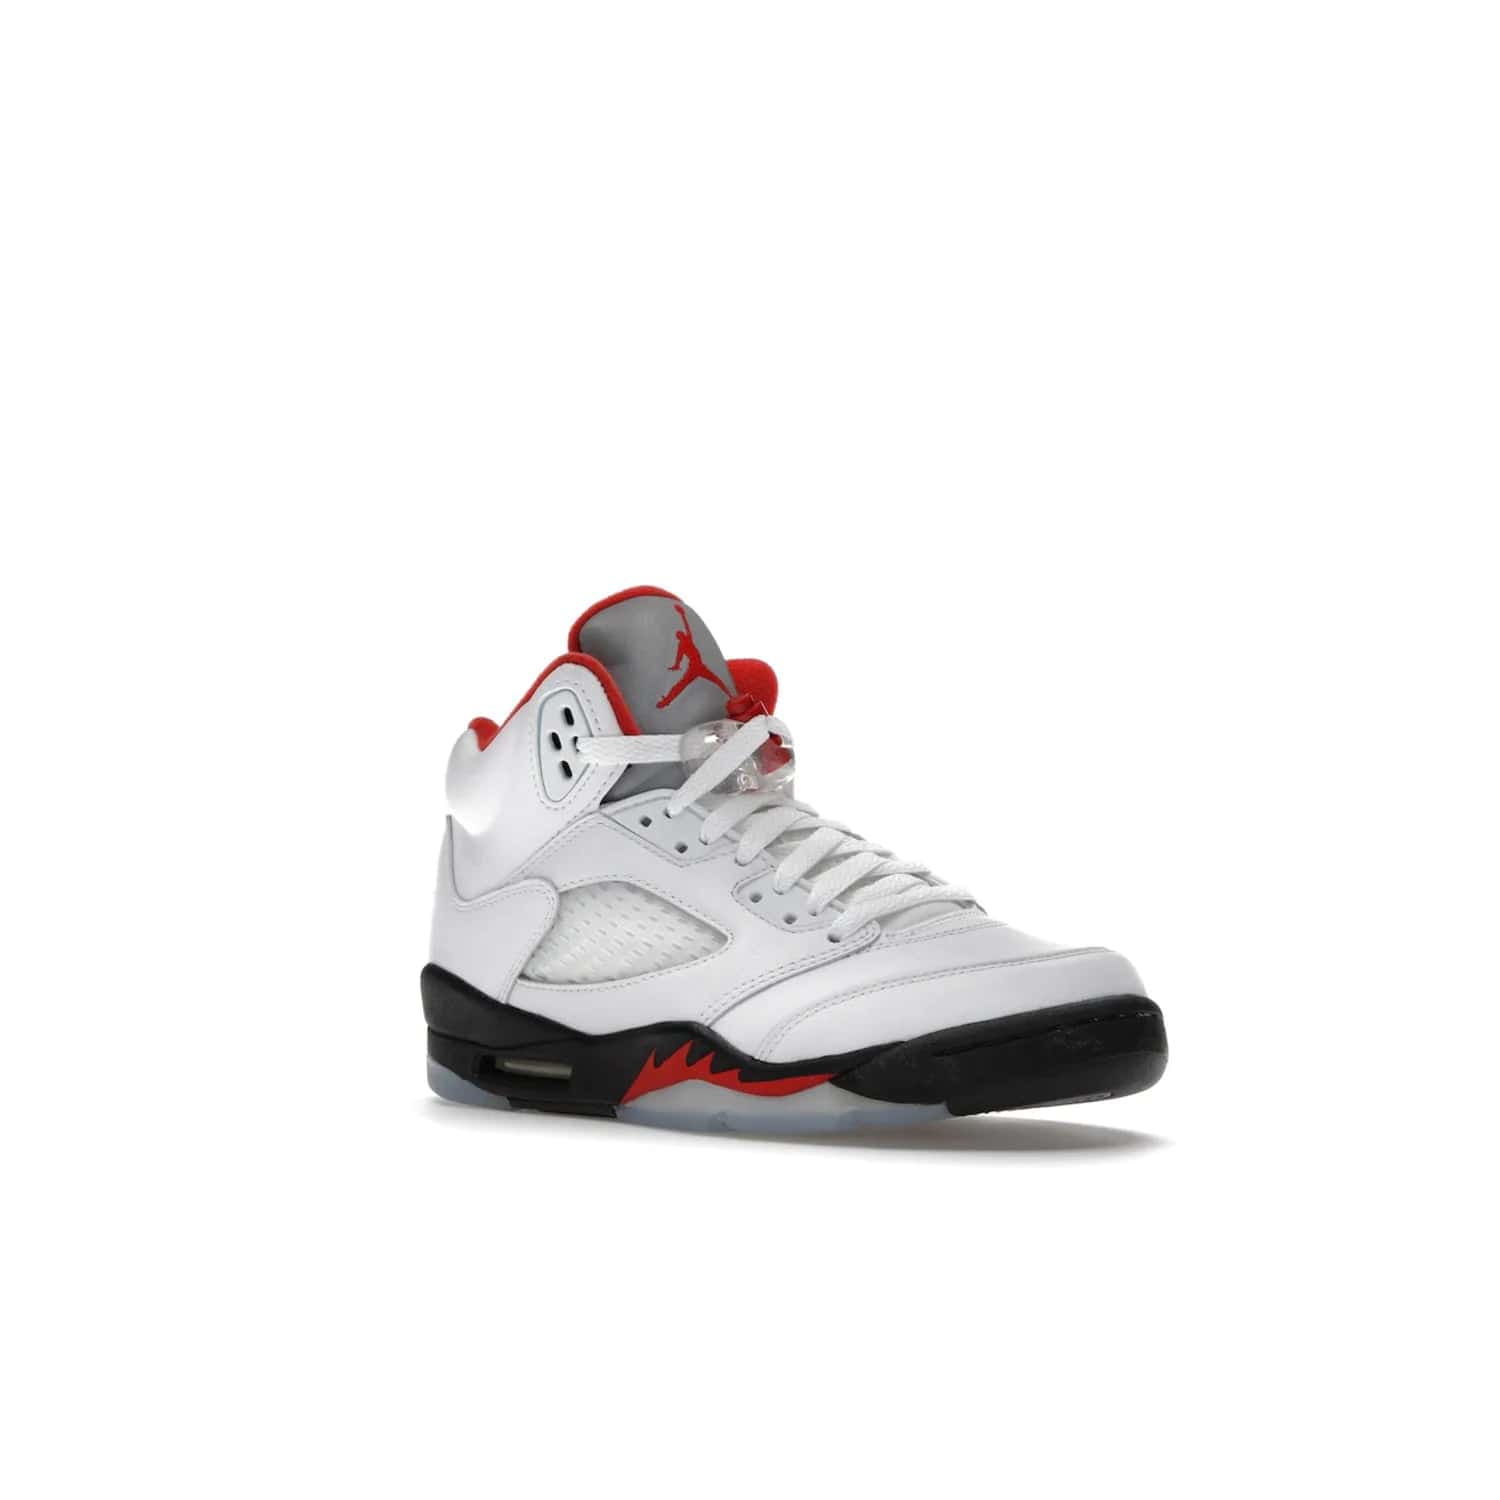 Jordan 5 Retro Fire Red Silver Tongue (2020) (GS) - Image 5 - Only at www.BallersClubKickz.com - A stylish option for any grade schooler. The Air Jordan 5 Retro Fire Red Silver Tongue 2020 GS features a combination of four hues, premium white leather, a clear mesh mid-upper and a reflective silver tongue. An icy translucent blue outsole completes the look. Available on May 2, $150.